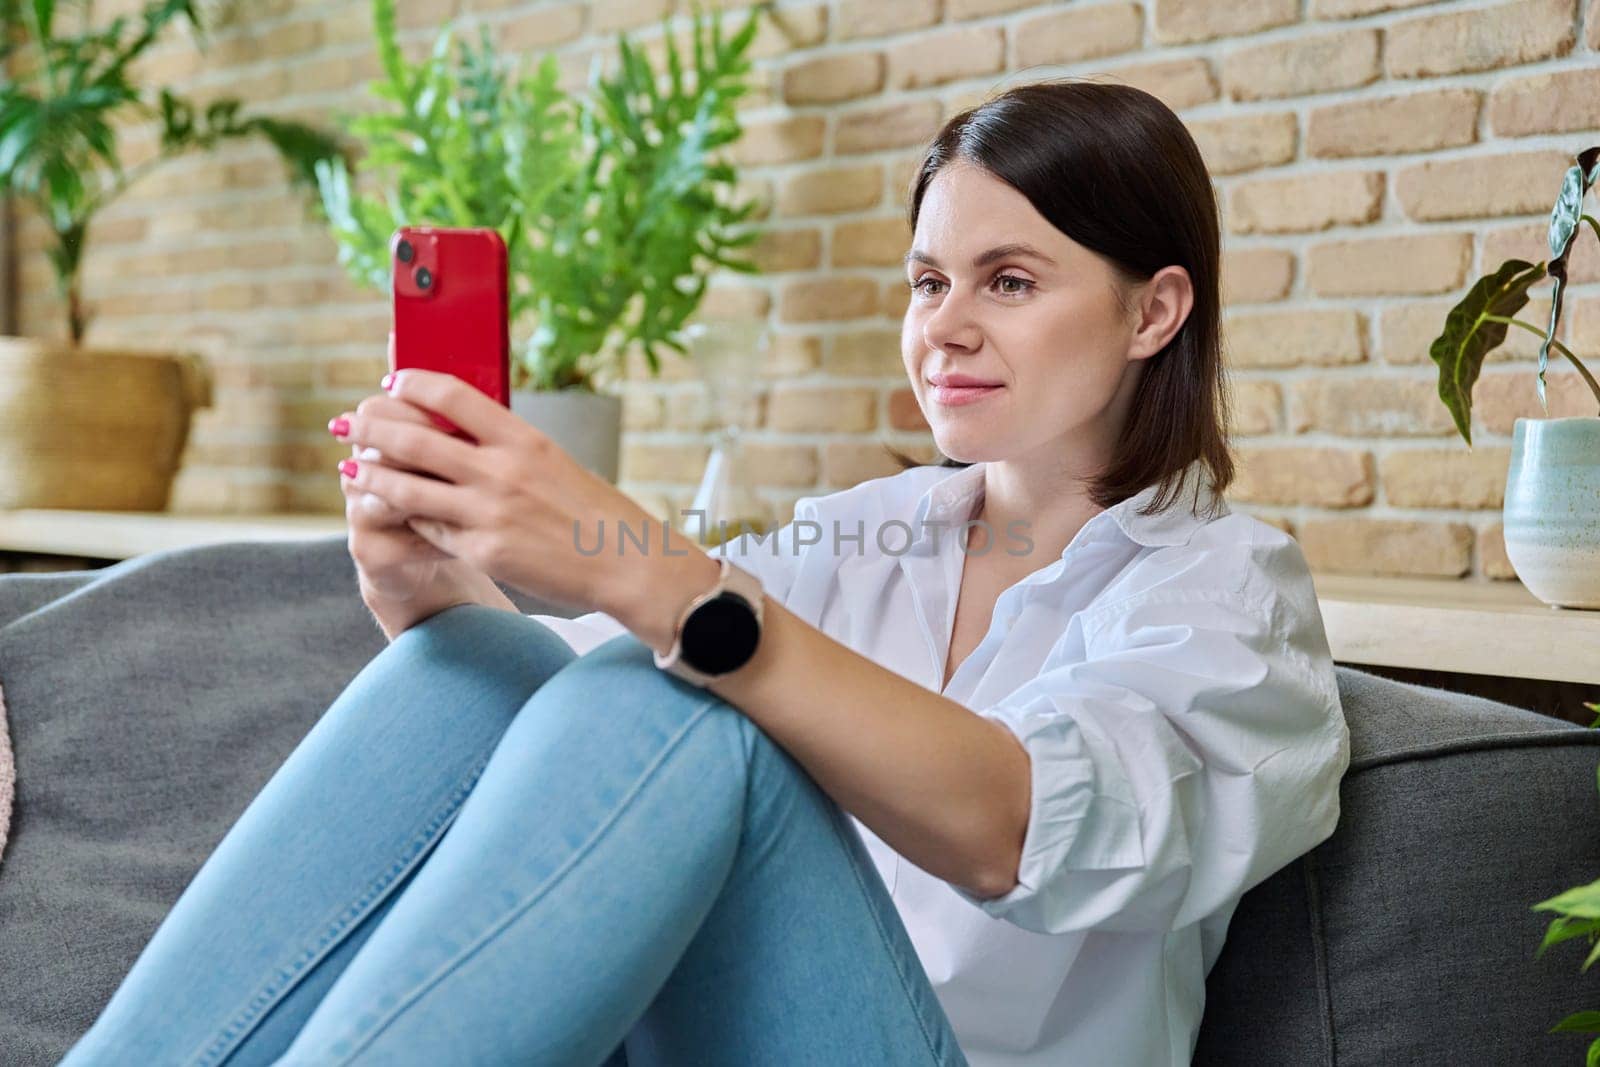 Young smiling happy woman using smartphone, sitting on sofa at home in living room. Internet online services, communication, mobile applications, technologies for leisure study work lifestyle